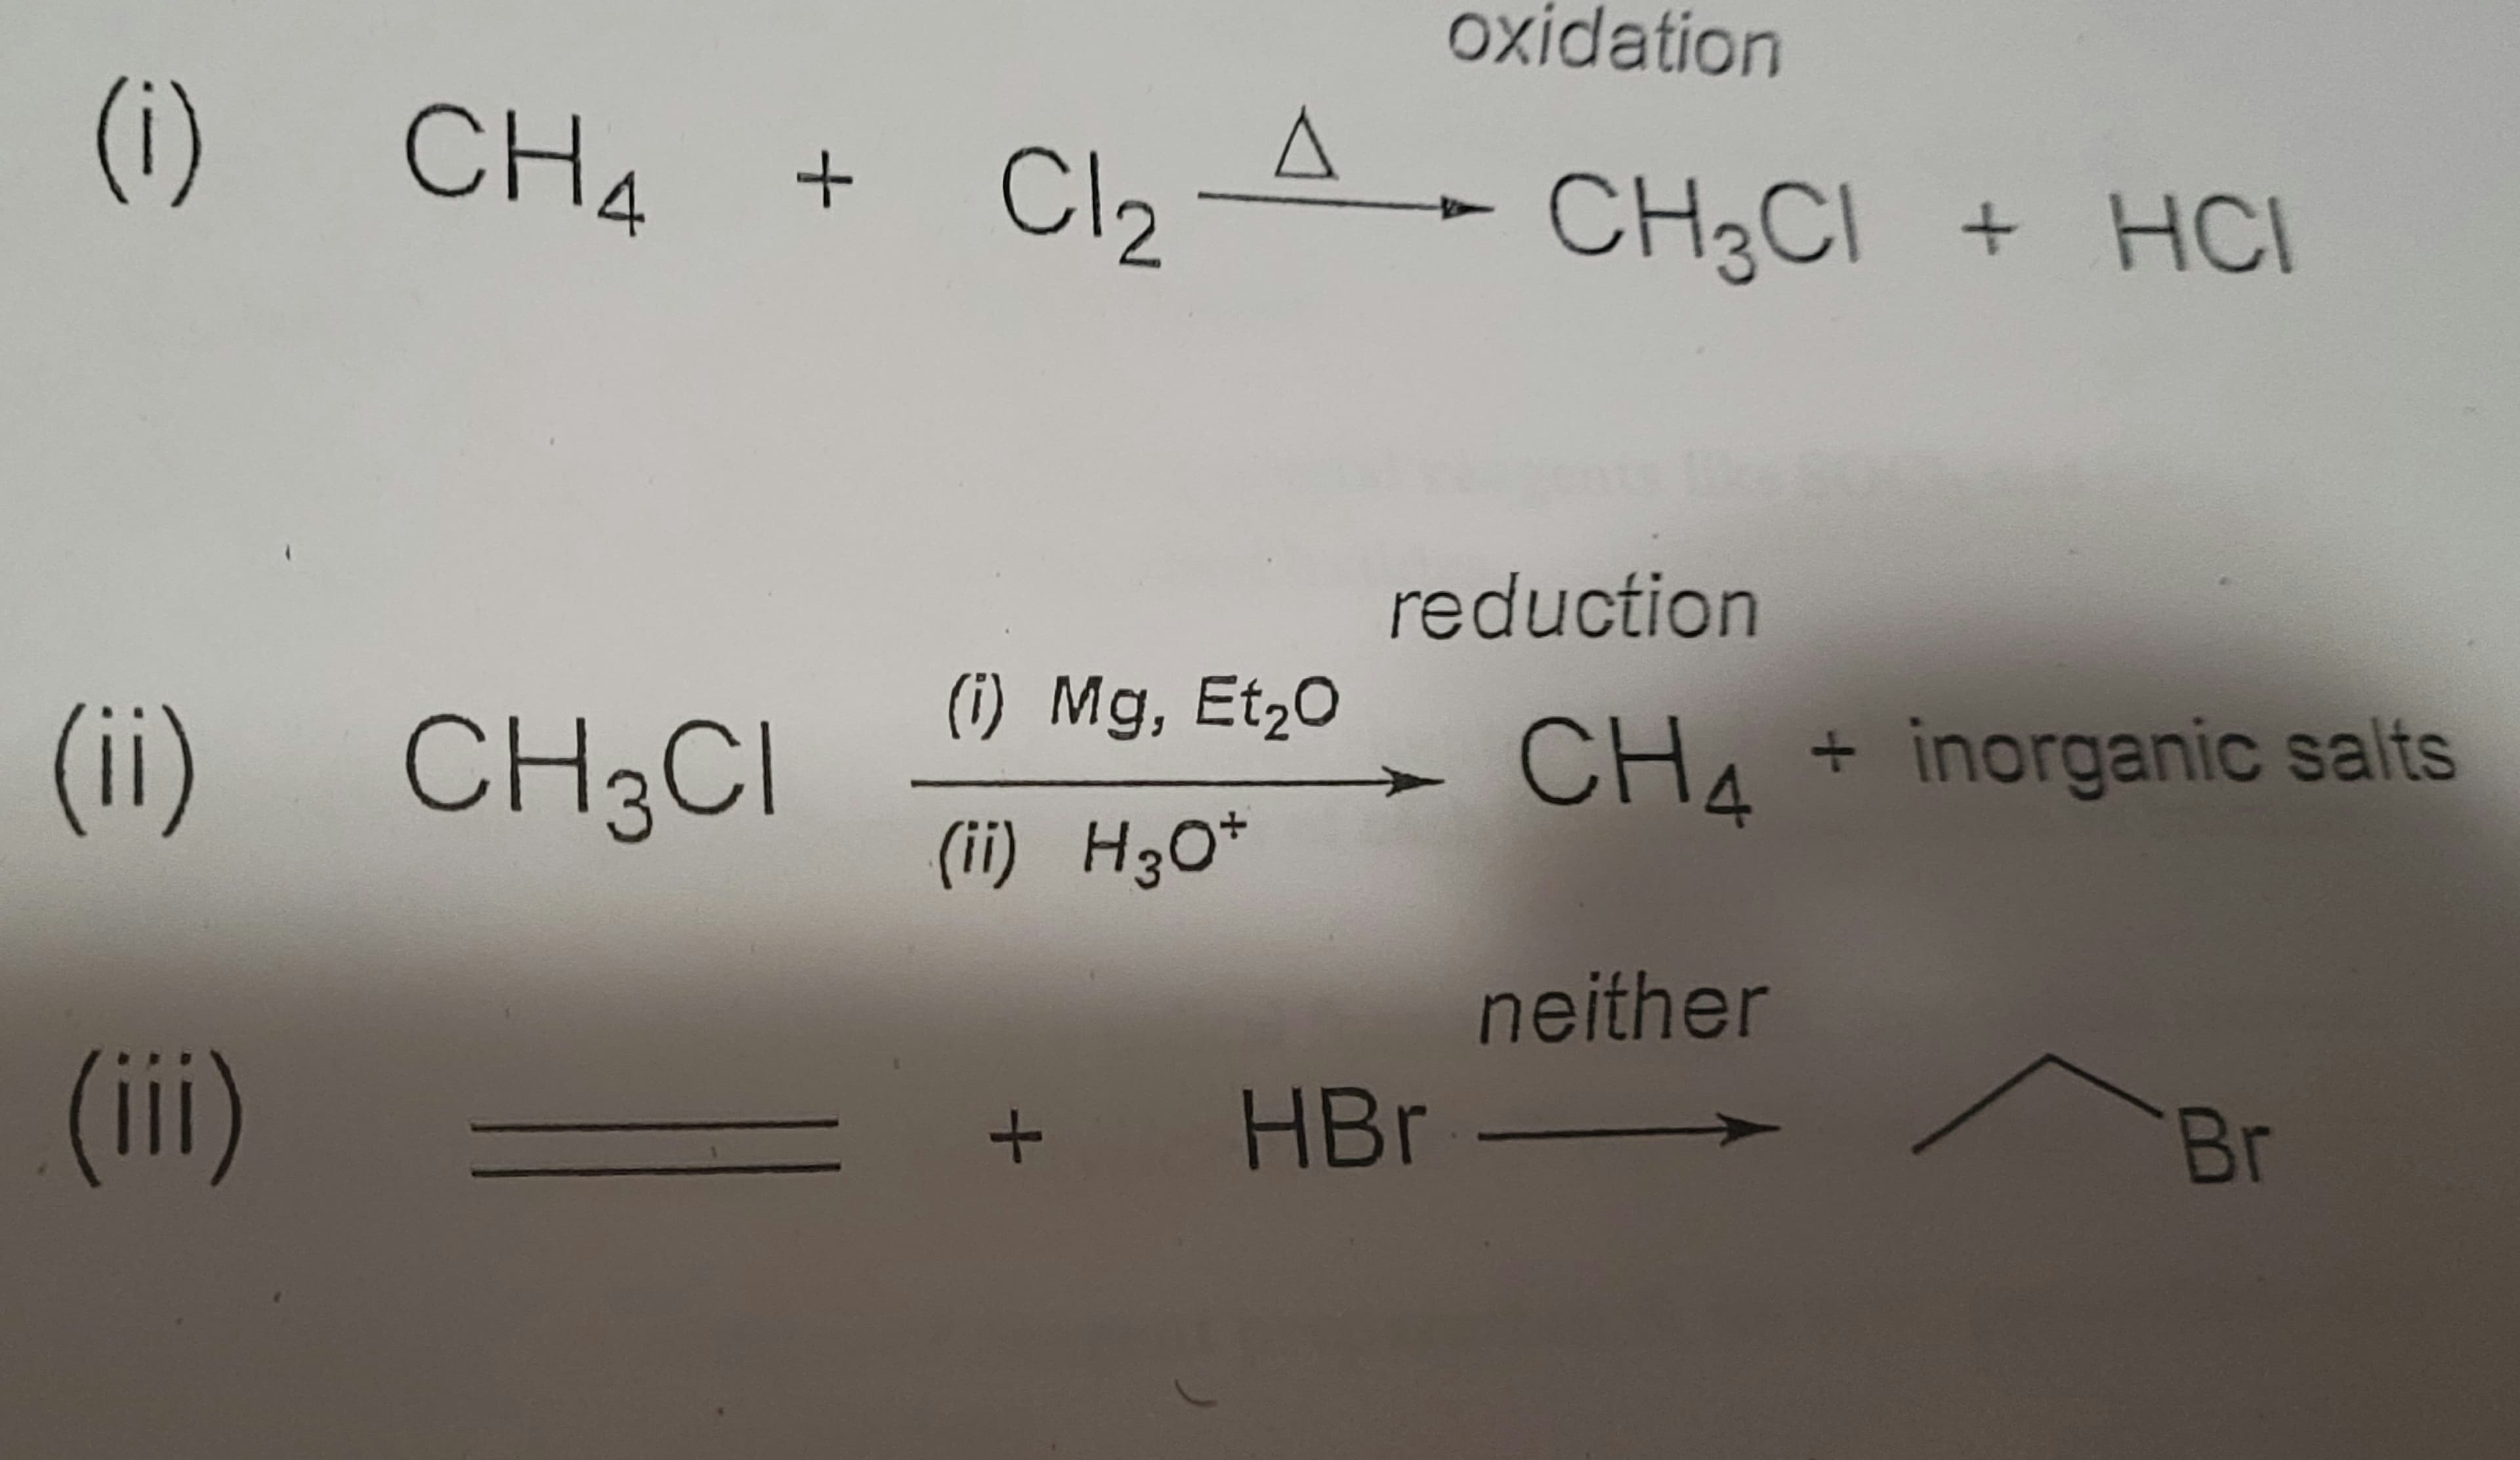 (1) CH₂
(ii) CH3C
(iii)
+
C1₂
A
(i) Mg, Et₂O
(ii) H3O+
oxidation
CH3Cl + HCI
reduction
CH4 + inorganic salts
neither
+ HBr -
Br